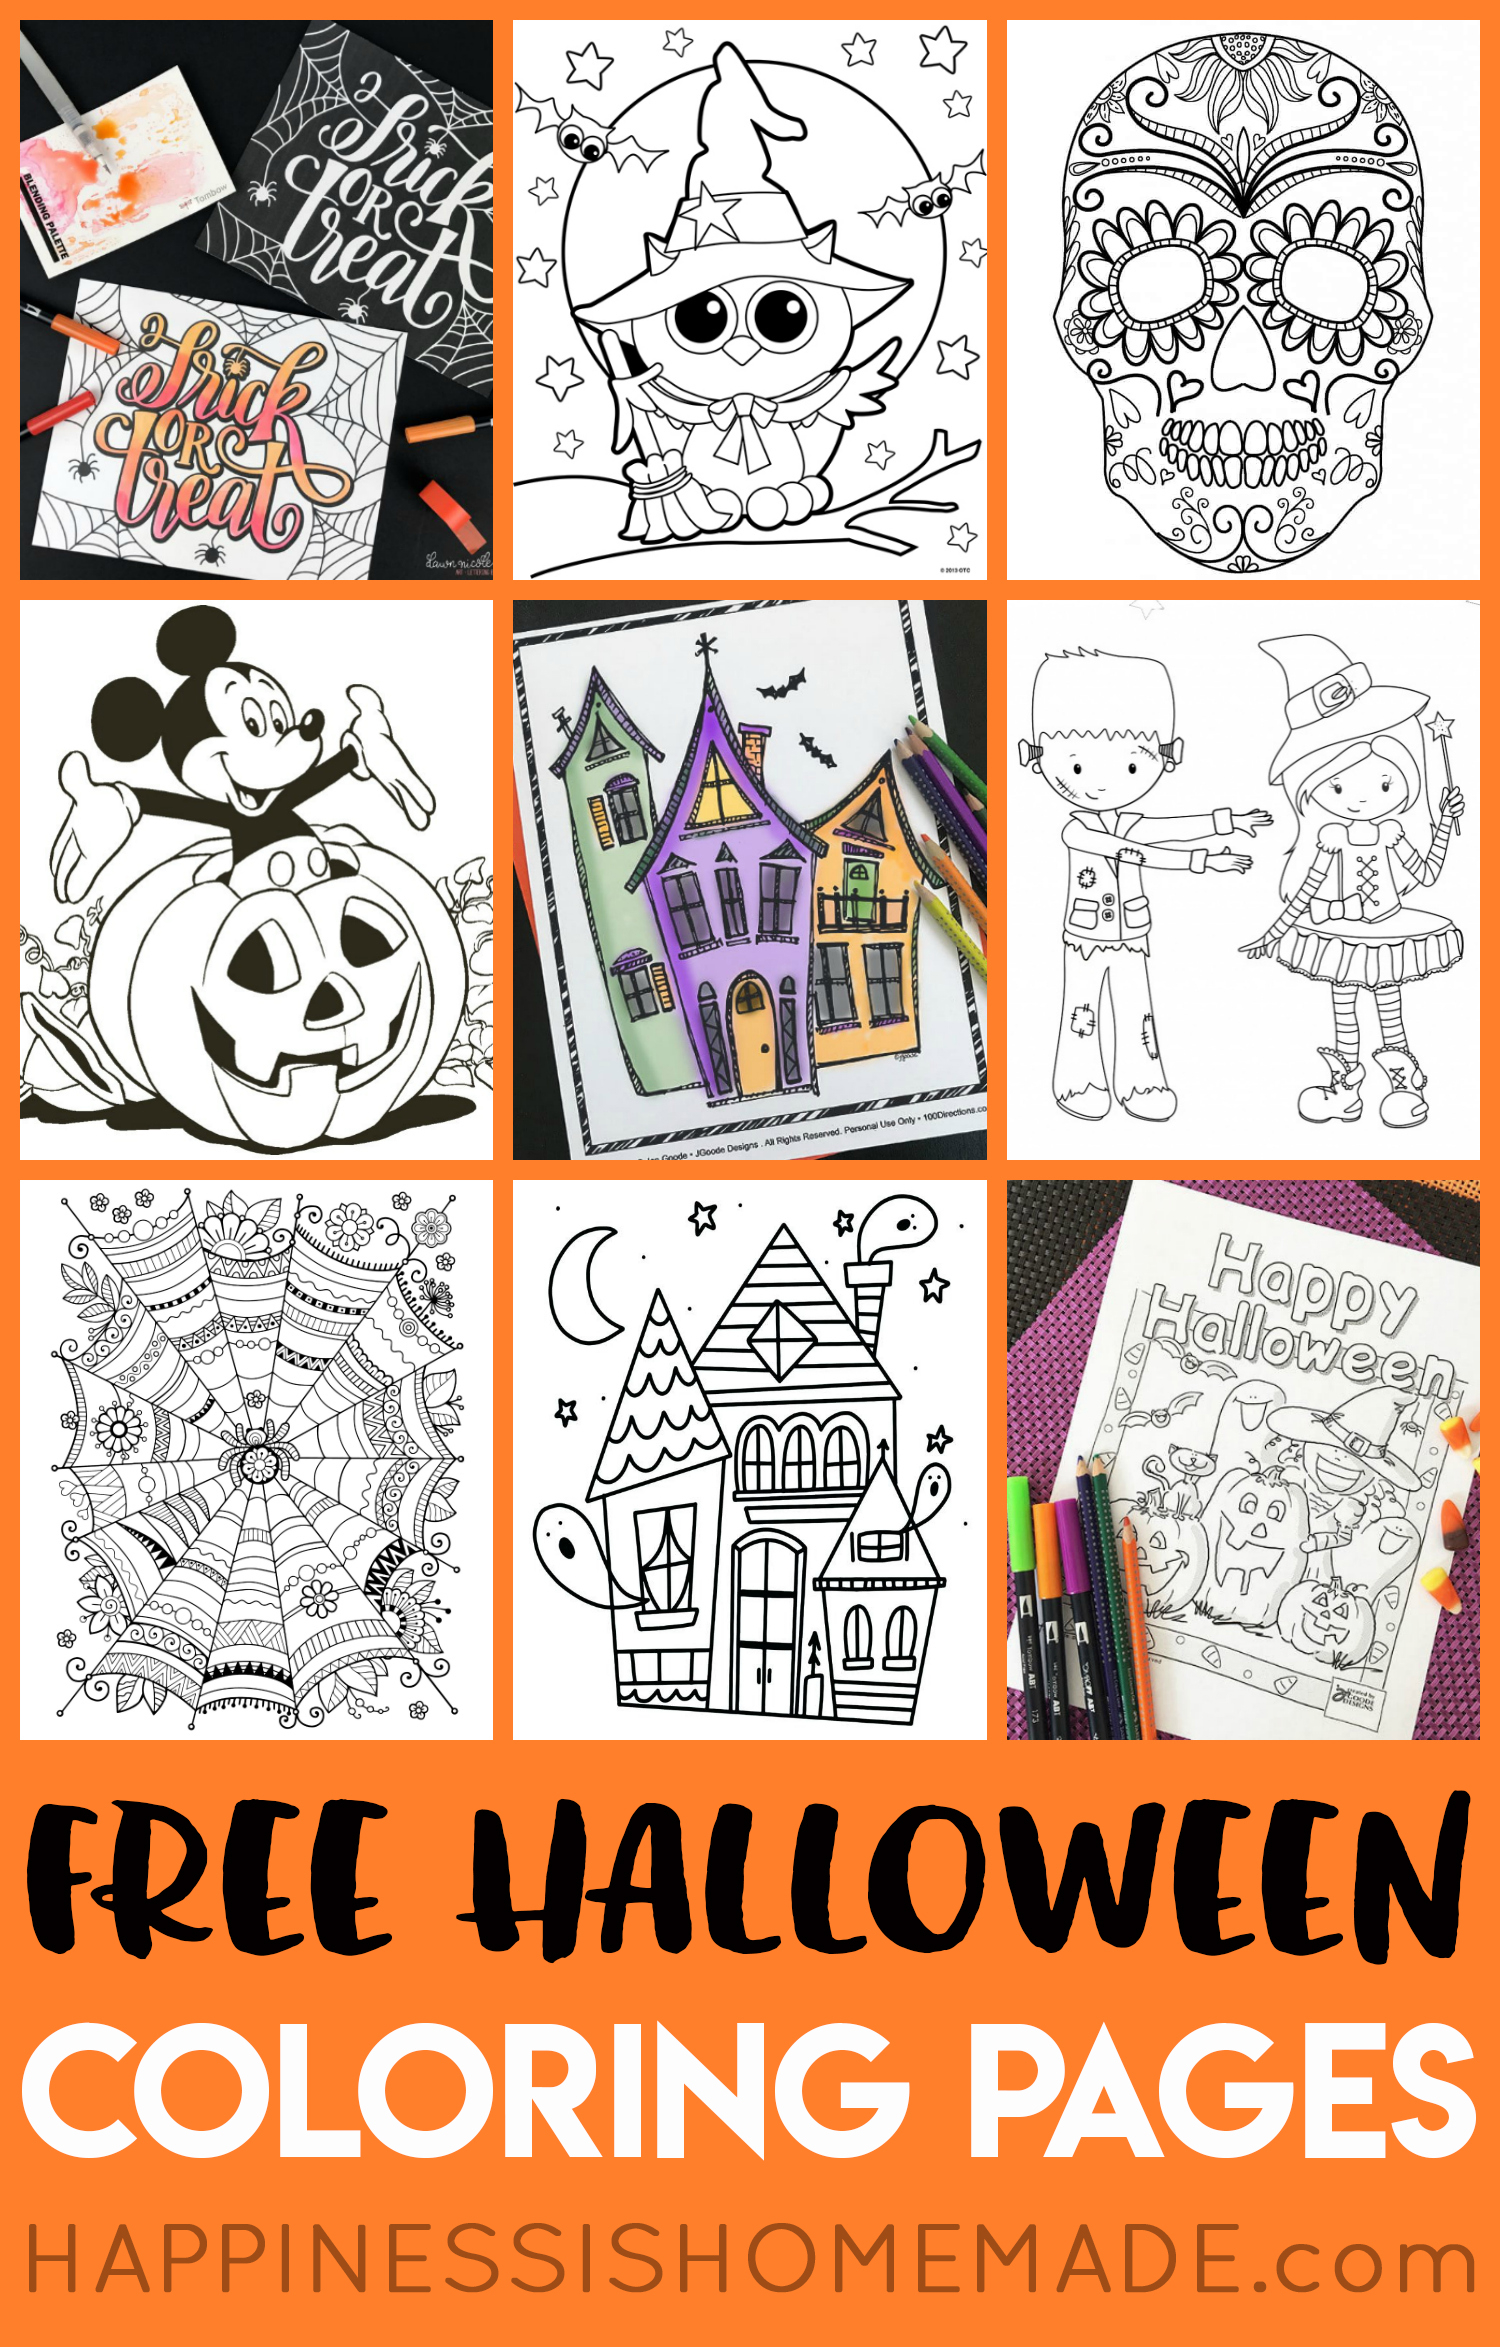 Free Halloween Coloring Pages For Adults &amp;amp; Kids - Happiness